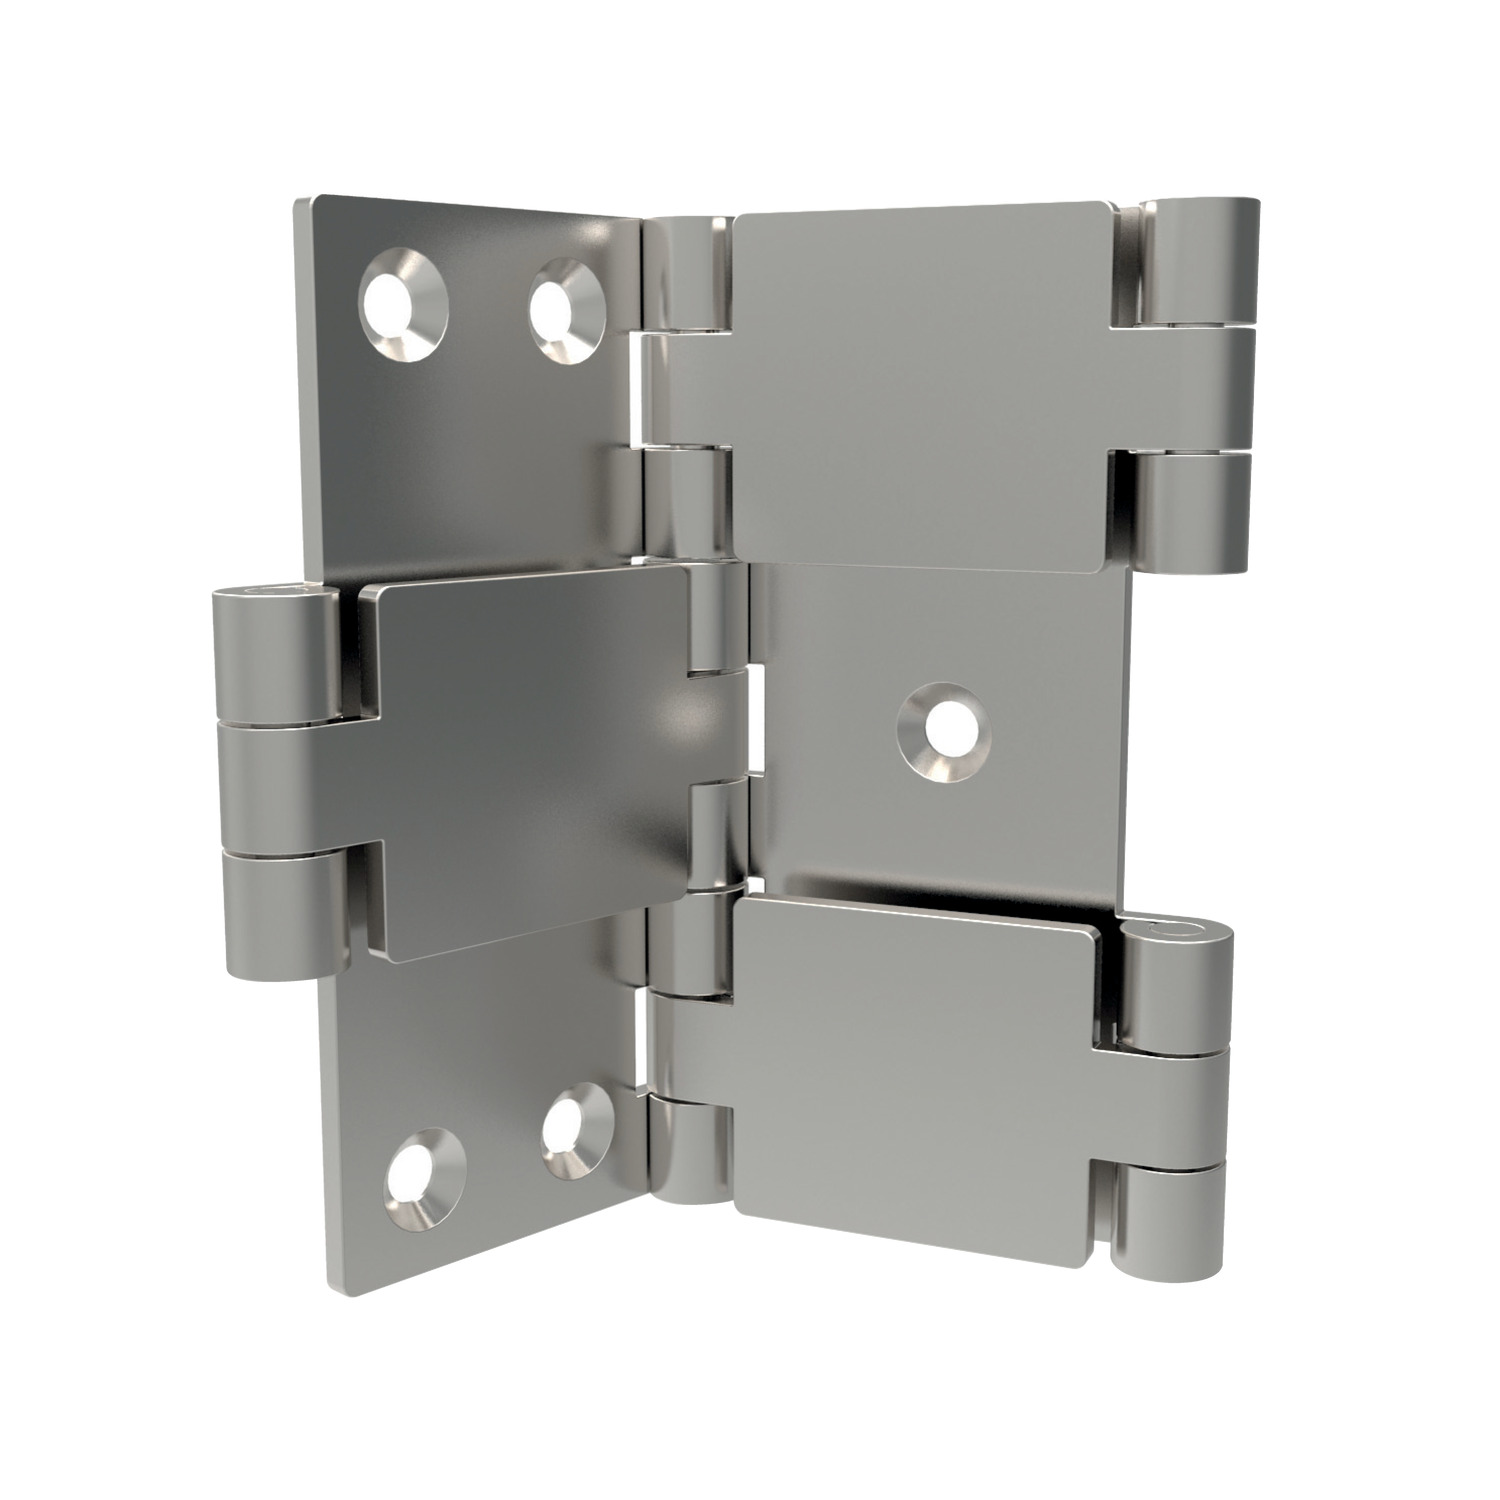 S2010.AC0070 Surface Mount Hinges - Double Pivot Stainless steel. 78 x 70